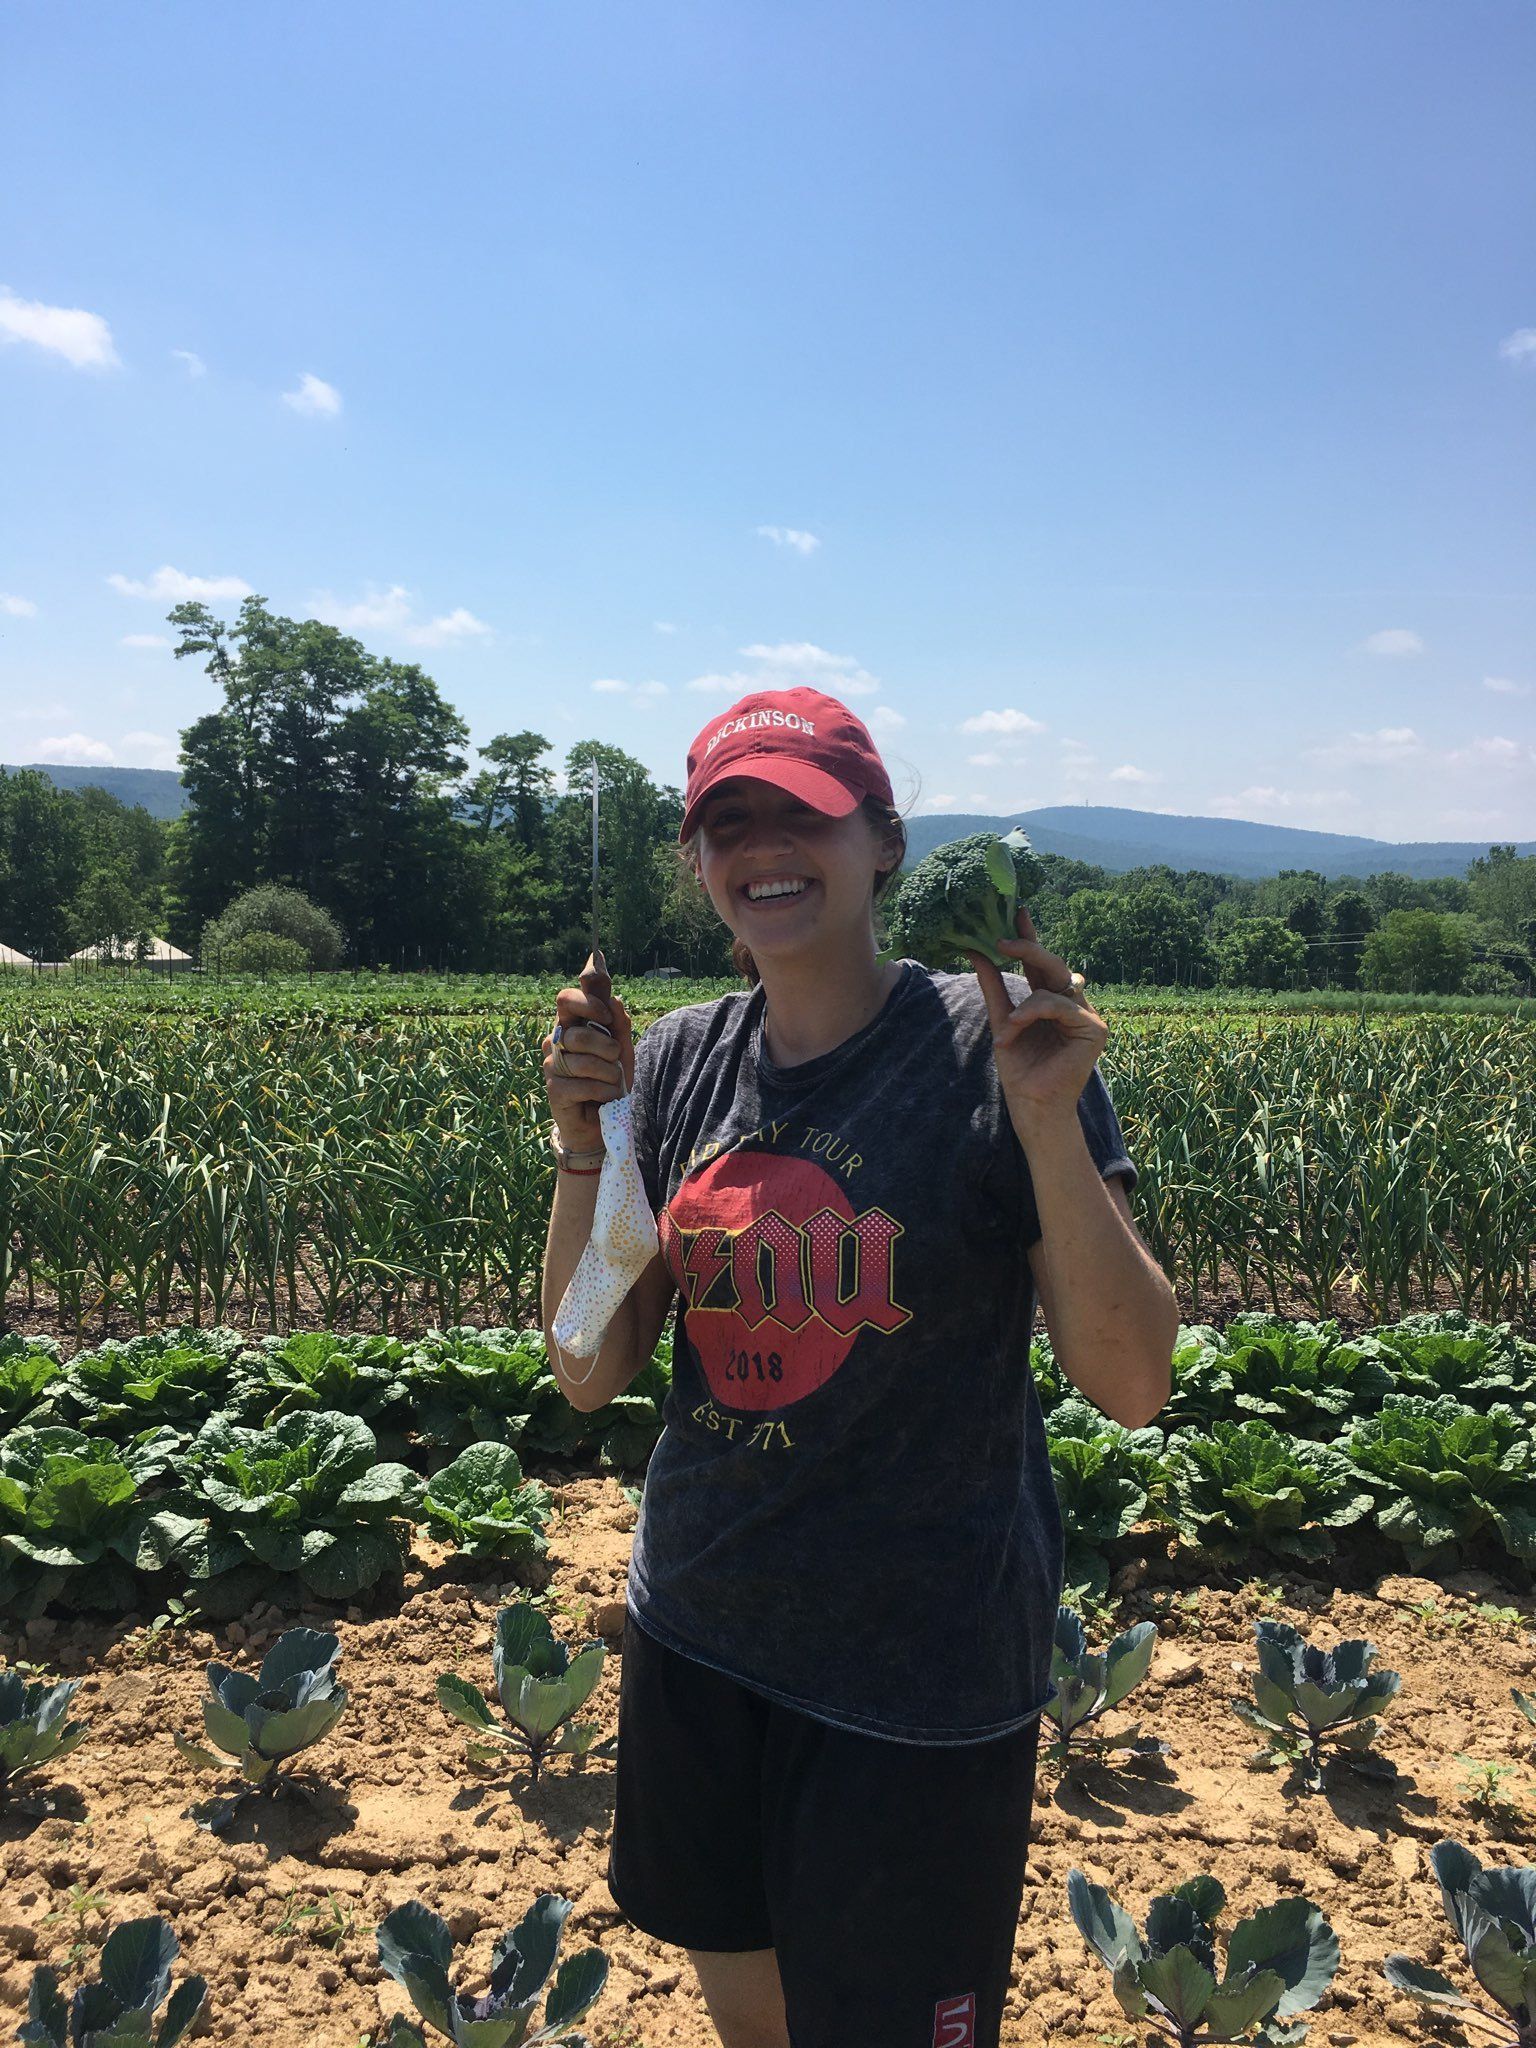 Next Happening: Farm Happenings for July 3, 2020